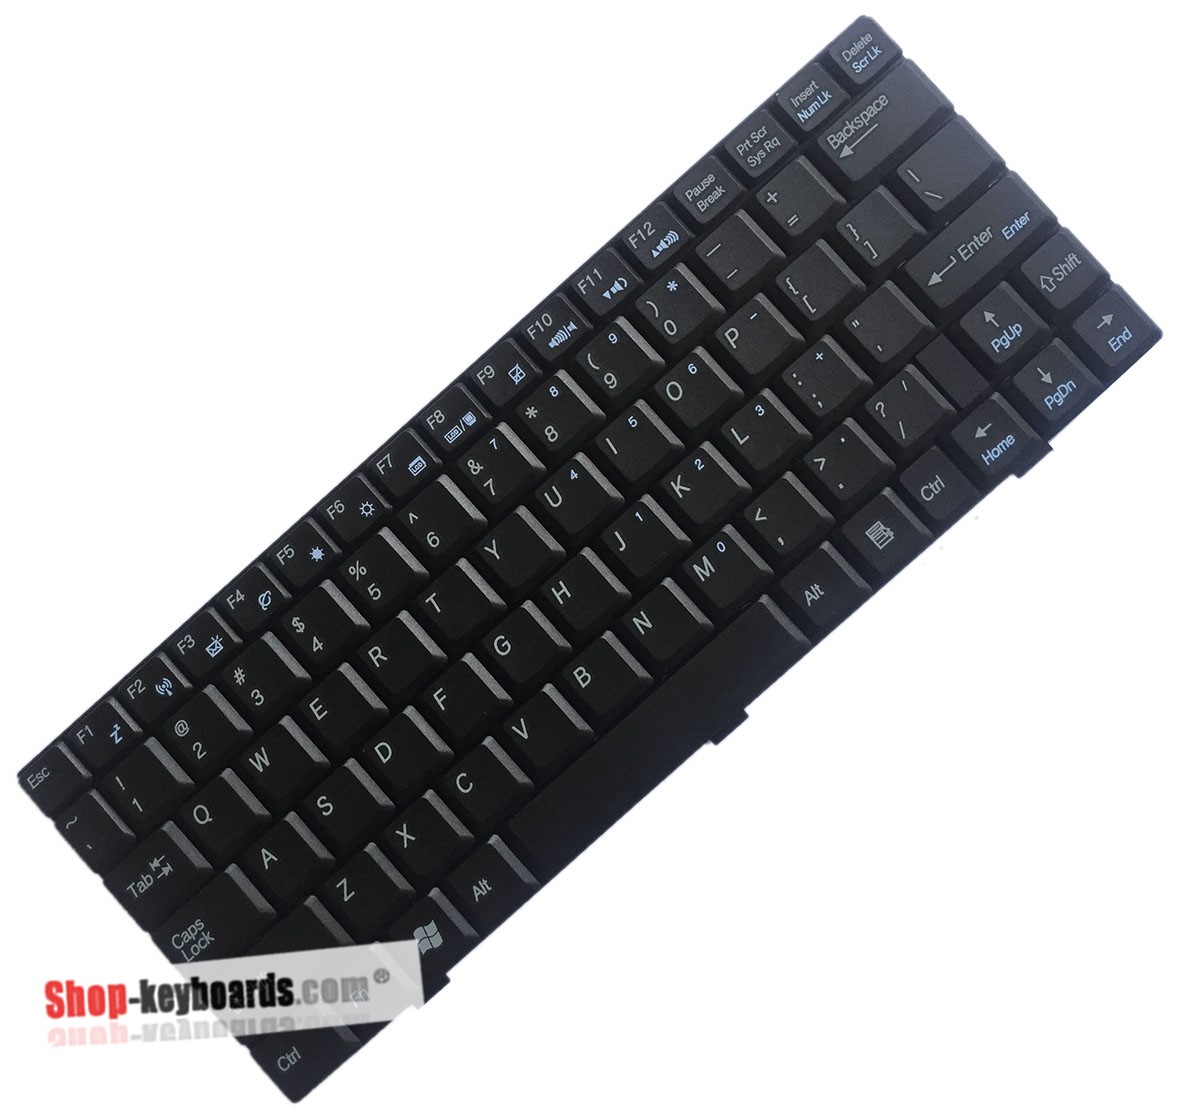 Asus Eee PC T101 Keyboard replacement